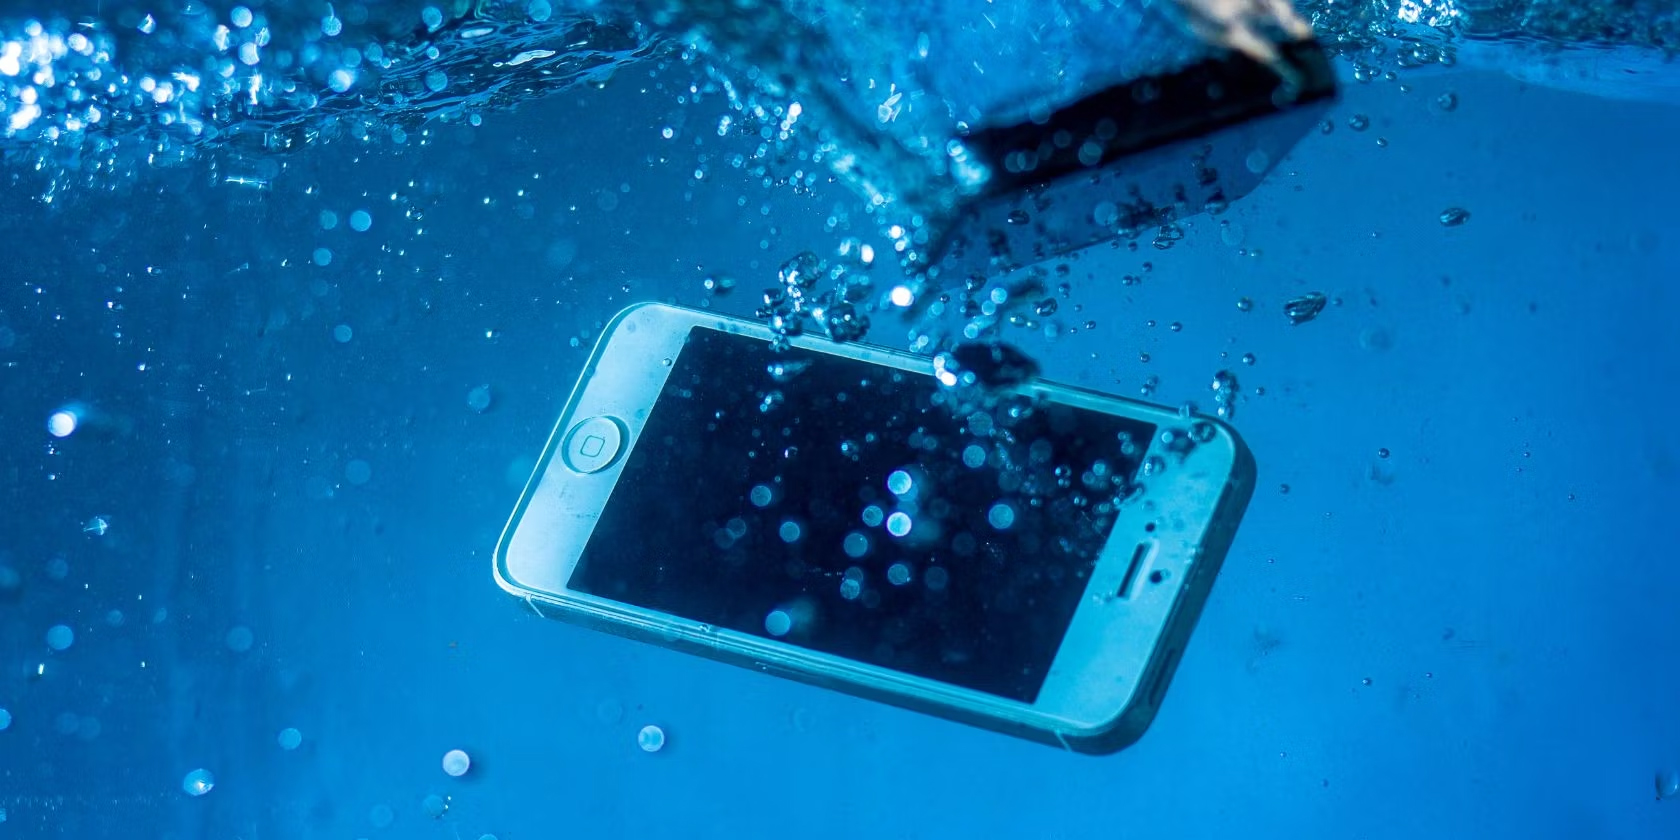 iPhone-submerged-in-water-6